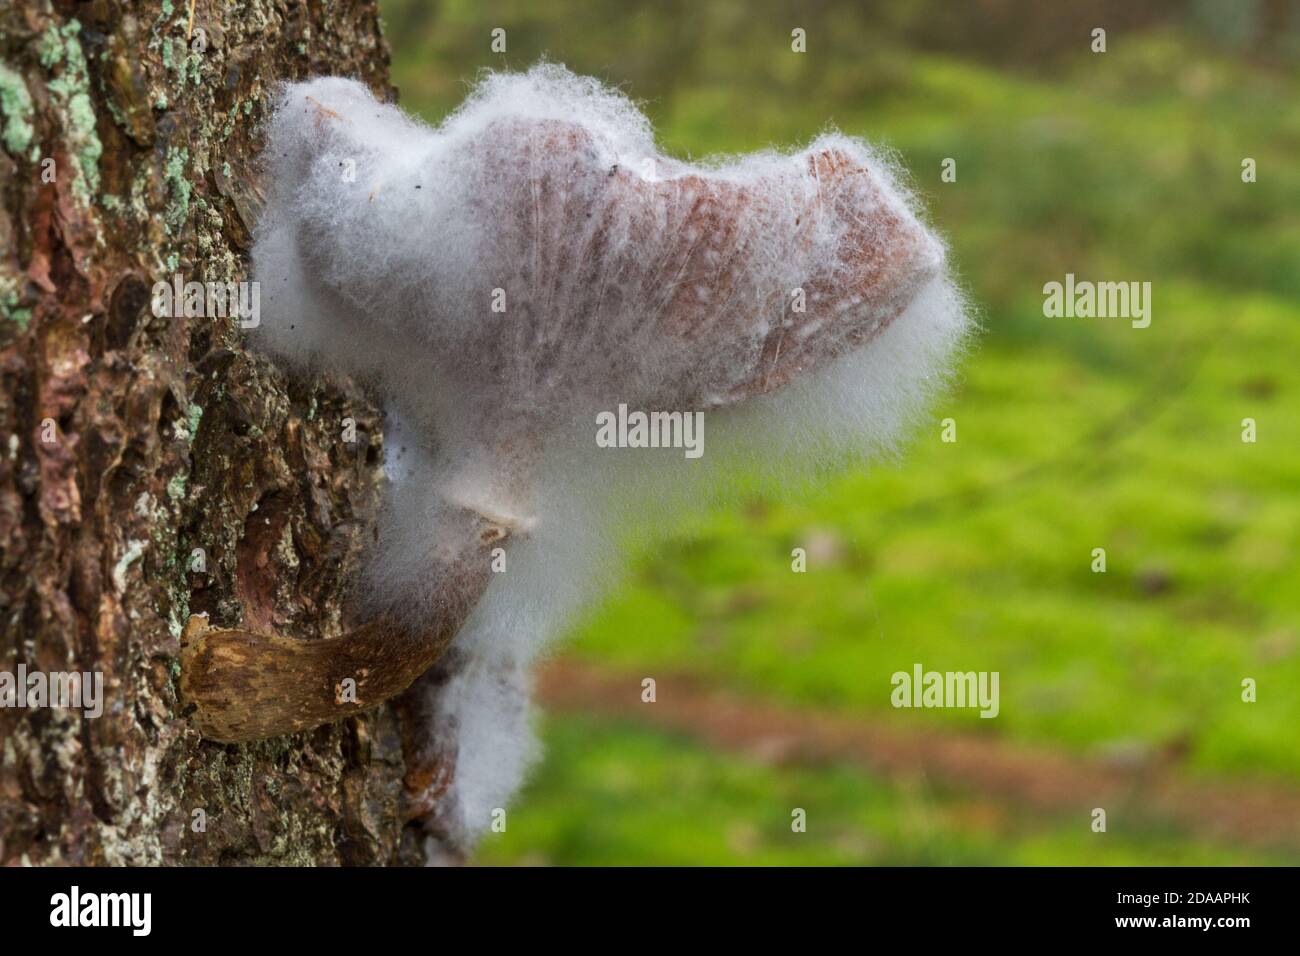 Cycle of life: mold growing on a a Honey mushroom which parasitizes a pine tree Stock Photo